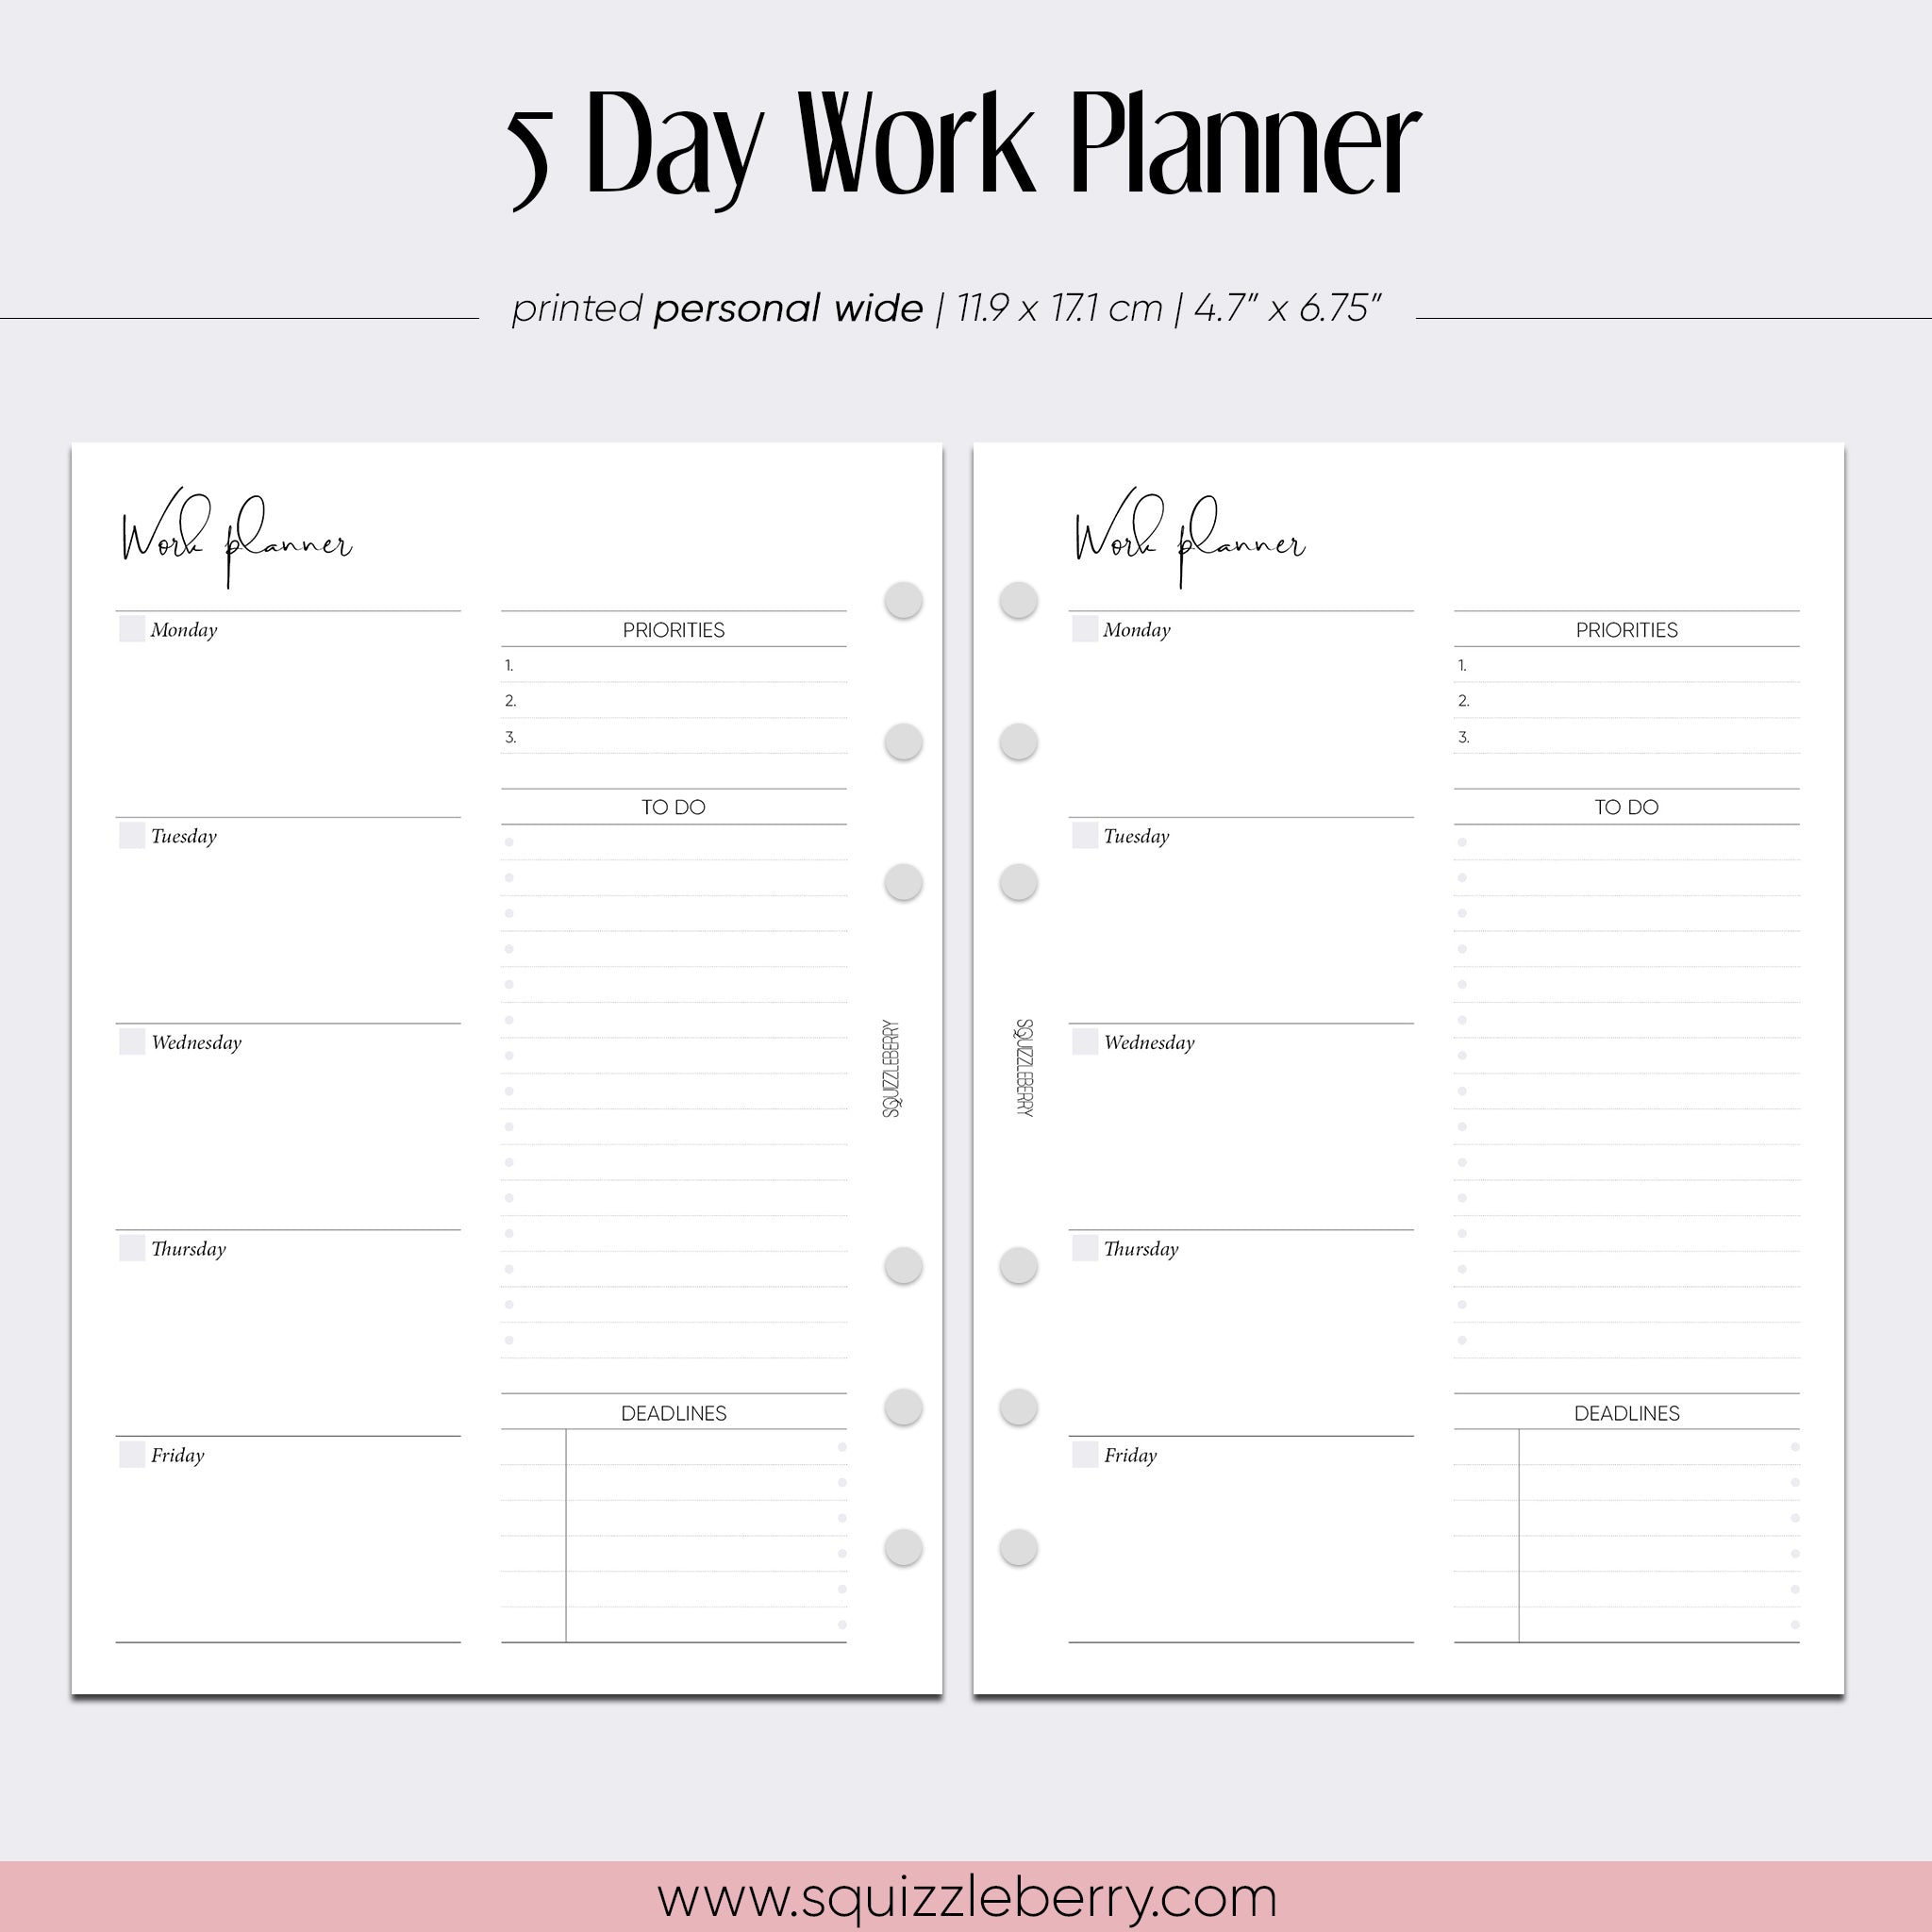 5 day working week planner inserts in personal wide